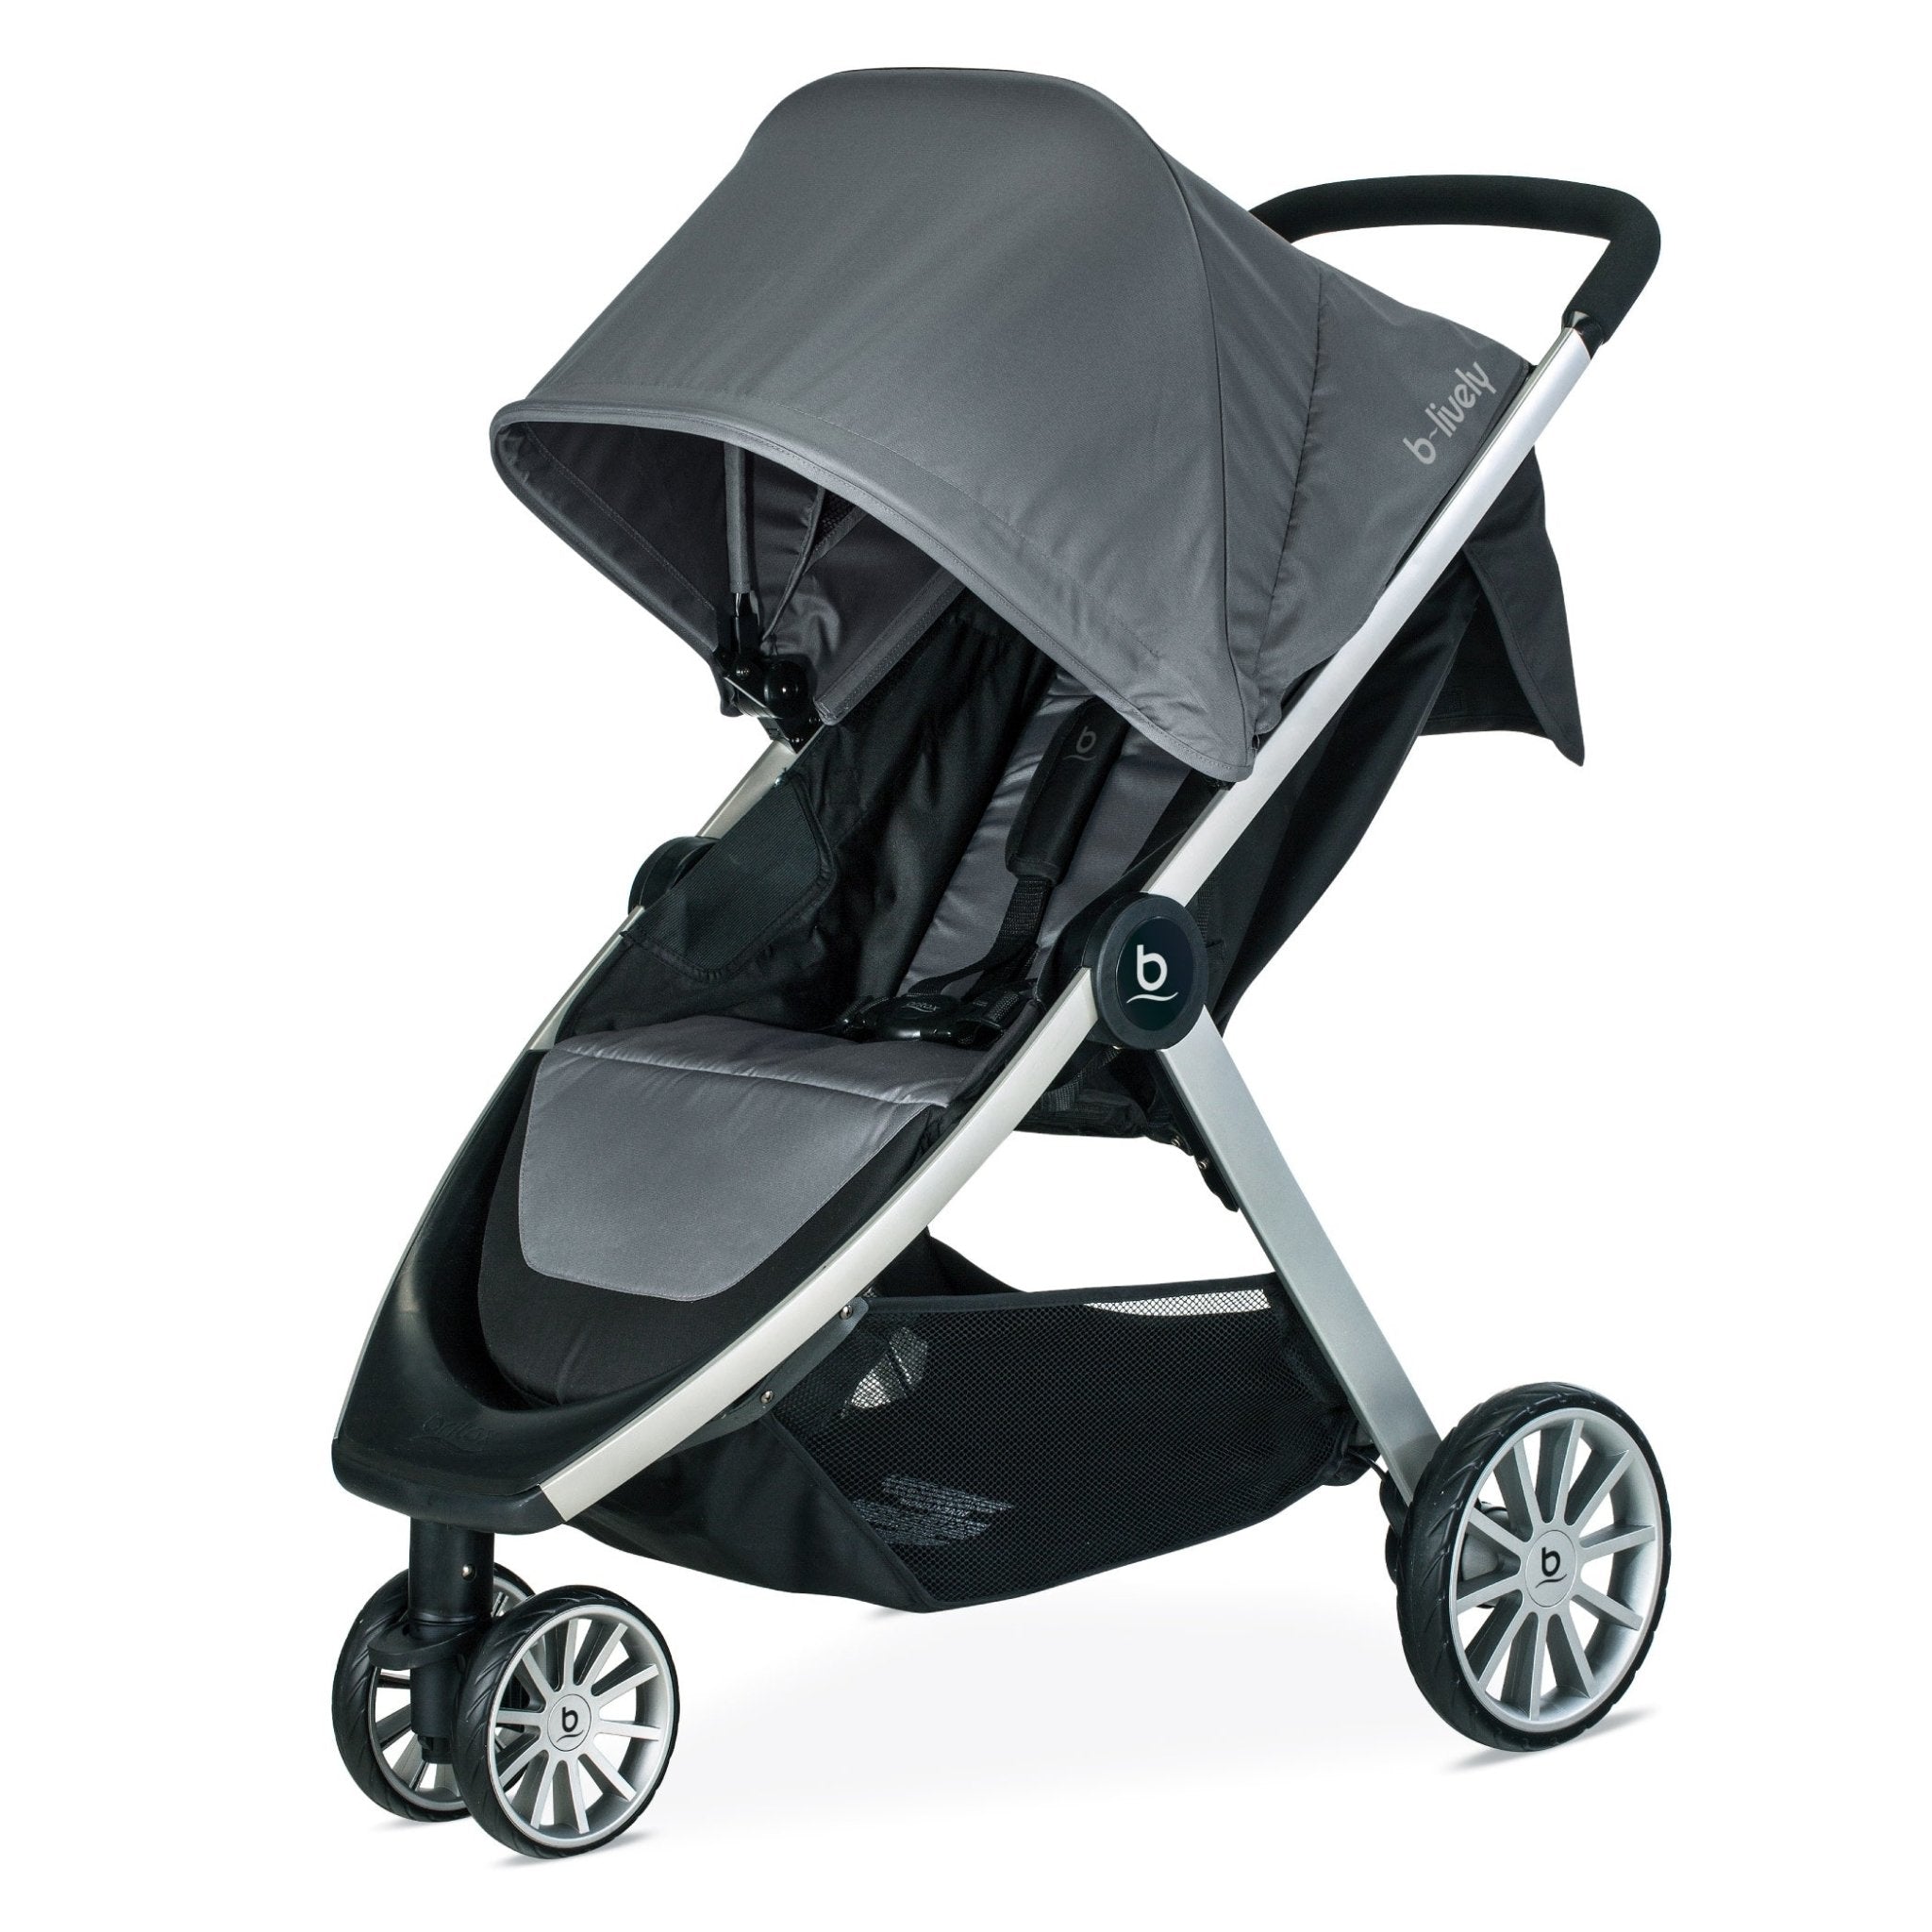 Britax B-Lively and B-Safe Gen2 FlexFit Travel System - ANB Baby -$300 - $500